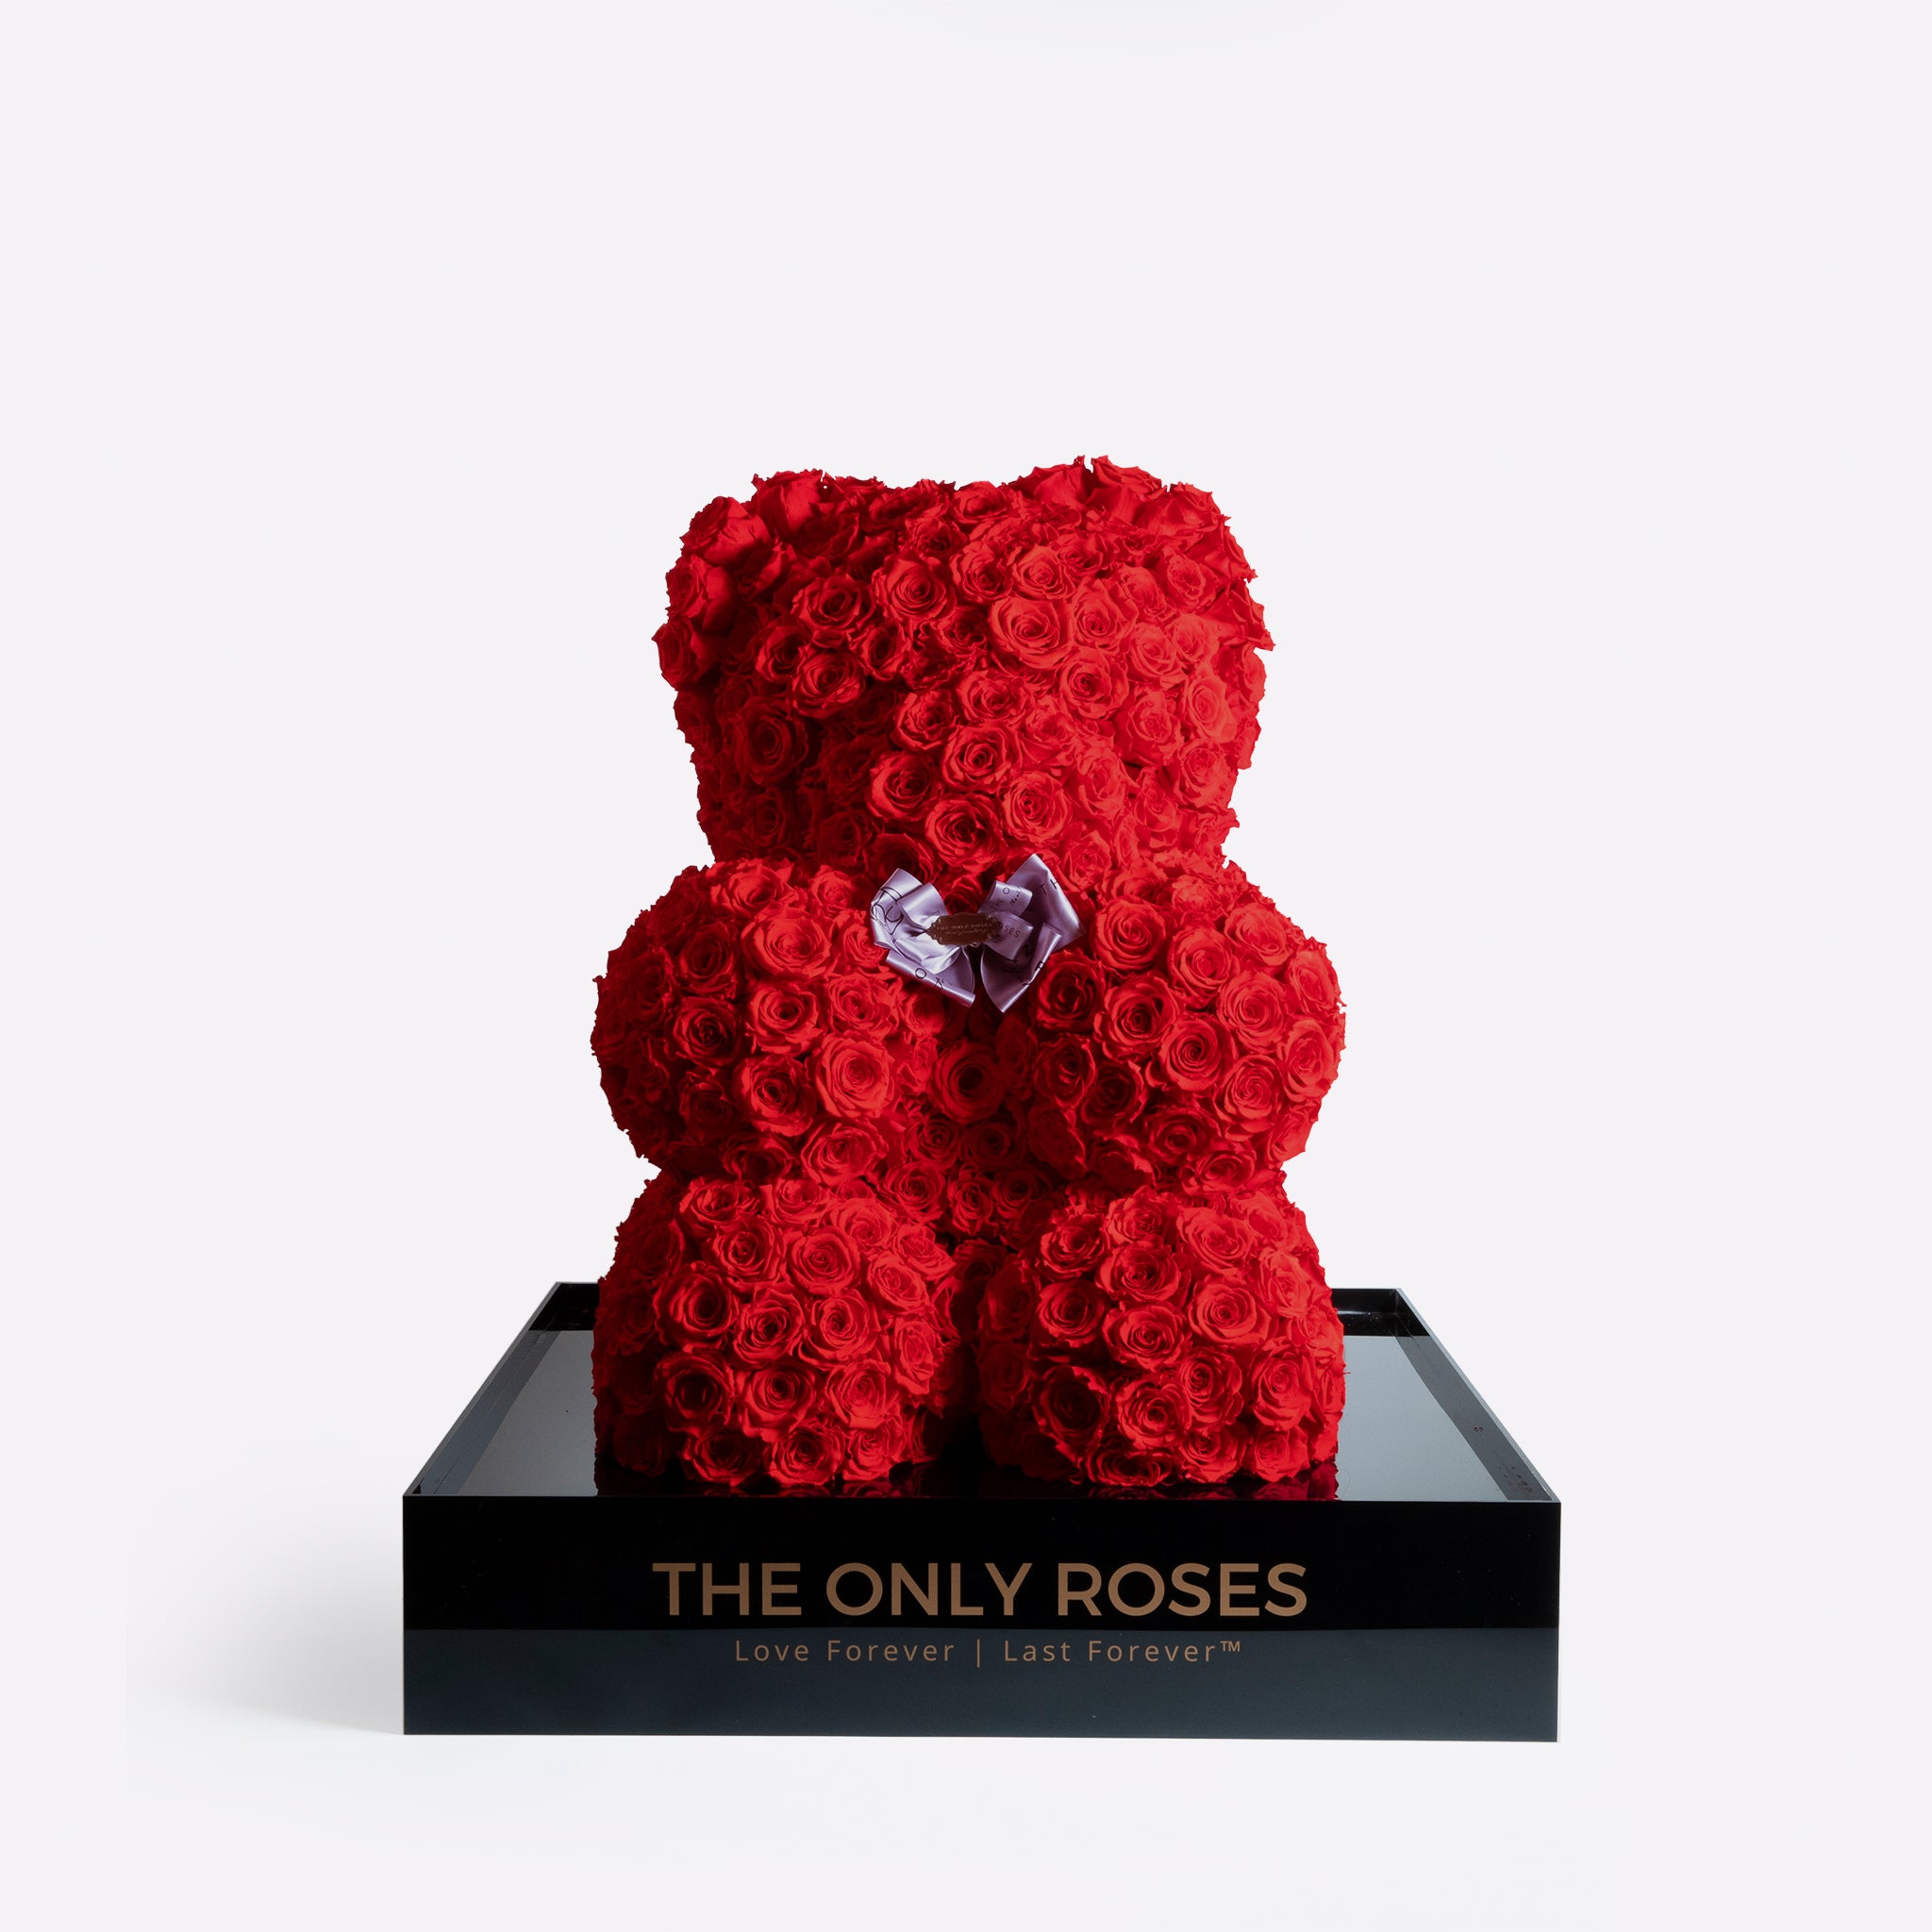 Happy Teddy Day 2020: 5 most expensive teddy bears in the world